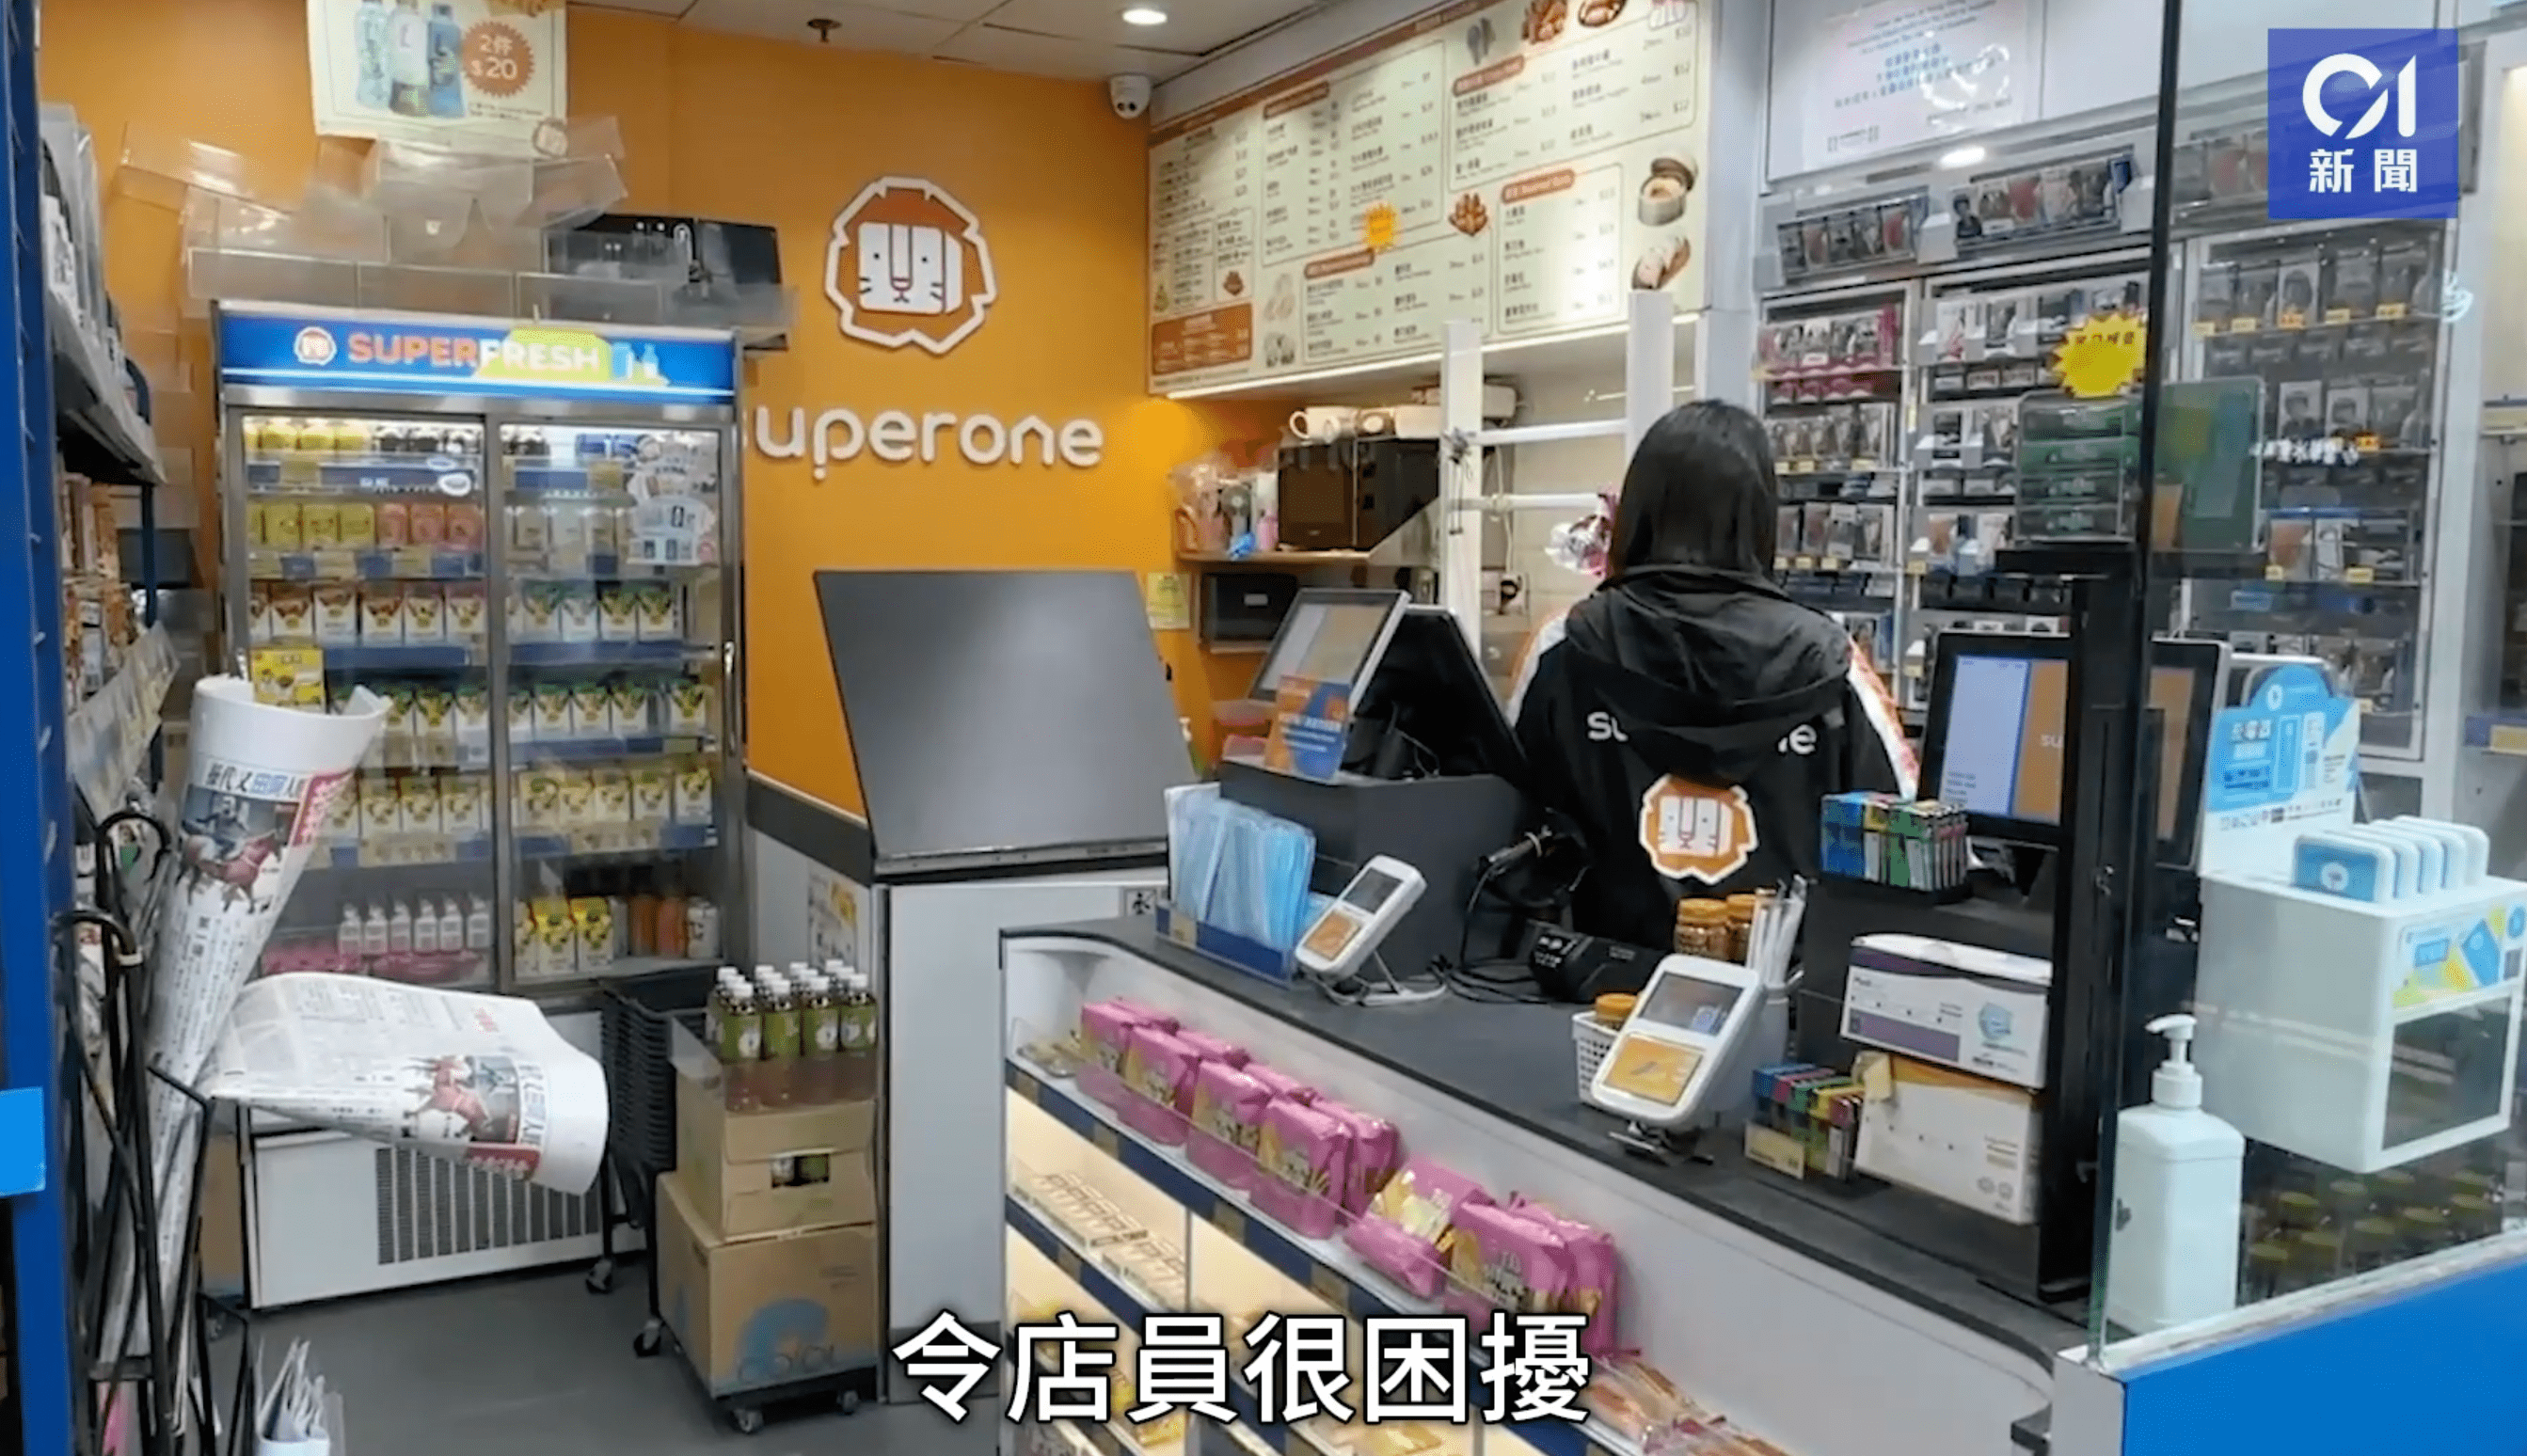 Hong kong store charges rm5. 70 for directions after receiving up to 100 queries daily by tourists  image 05